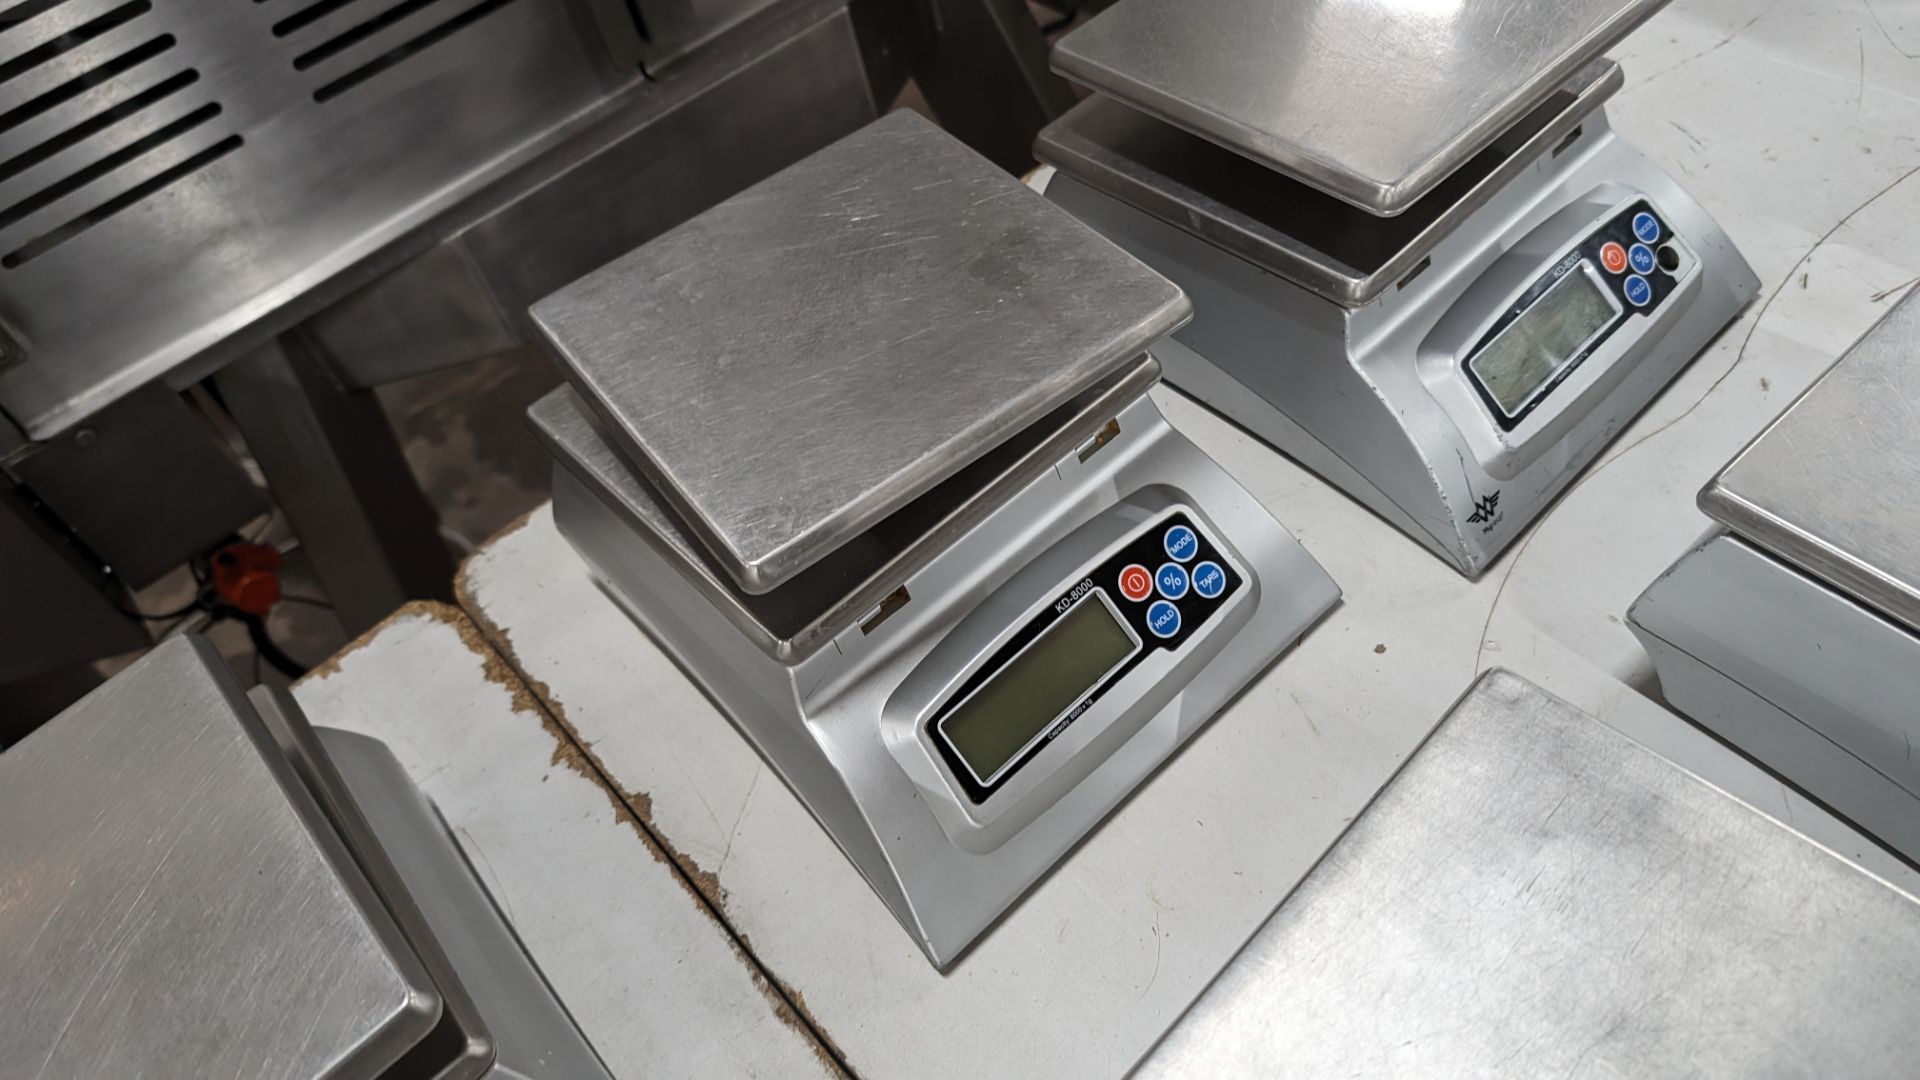 3 off Myweigh model KD-8000 digital scales, plus one additional platform for use with same - Image 5 of 6